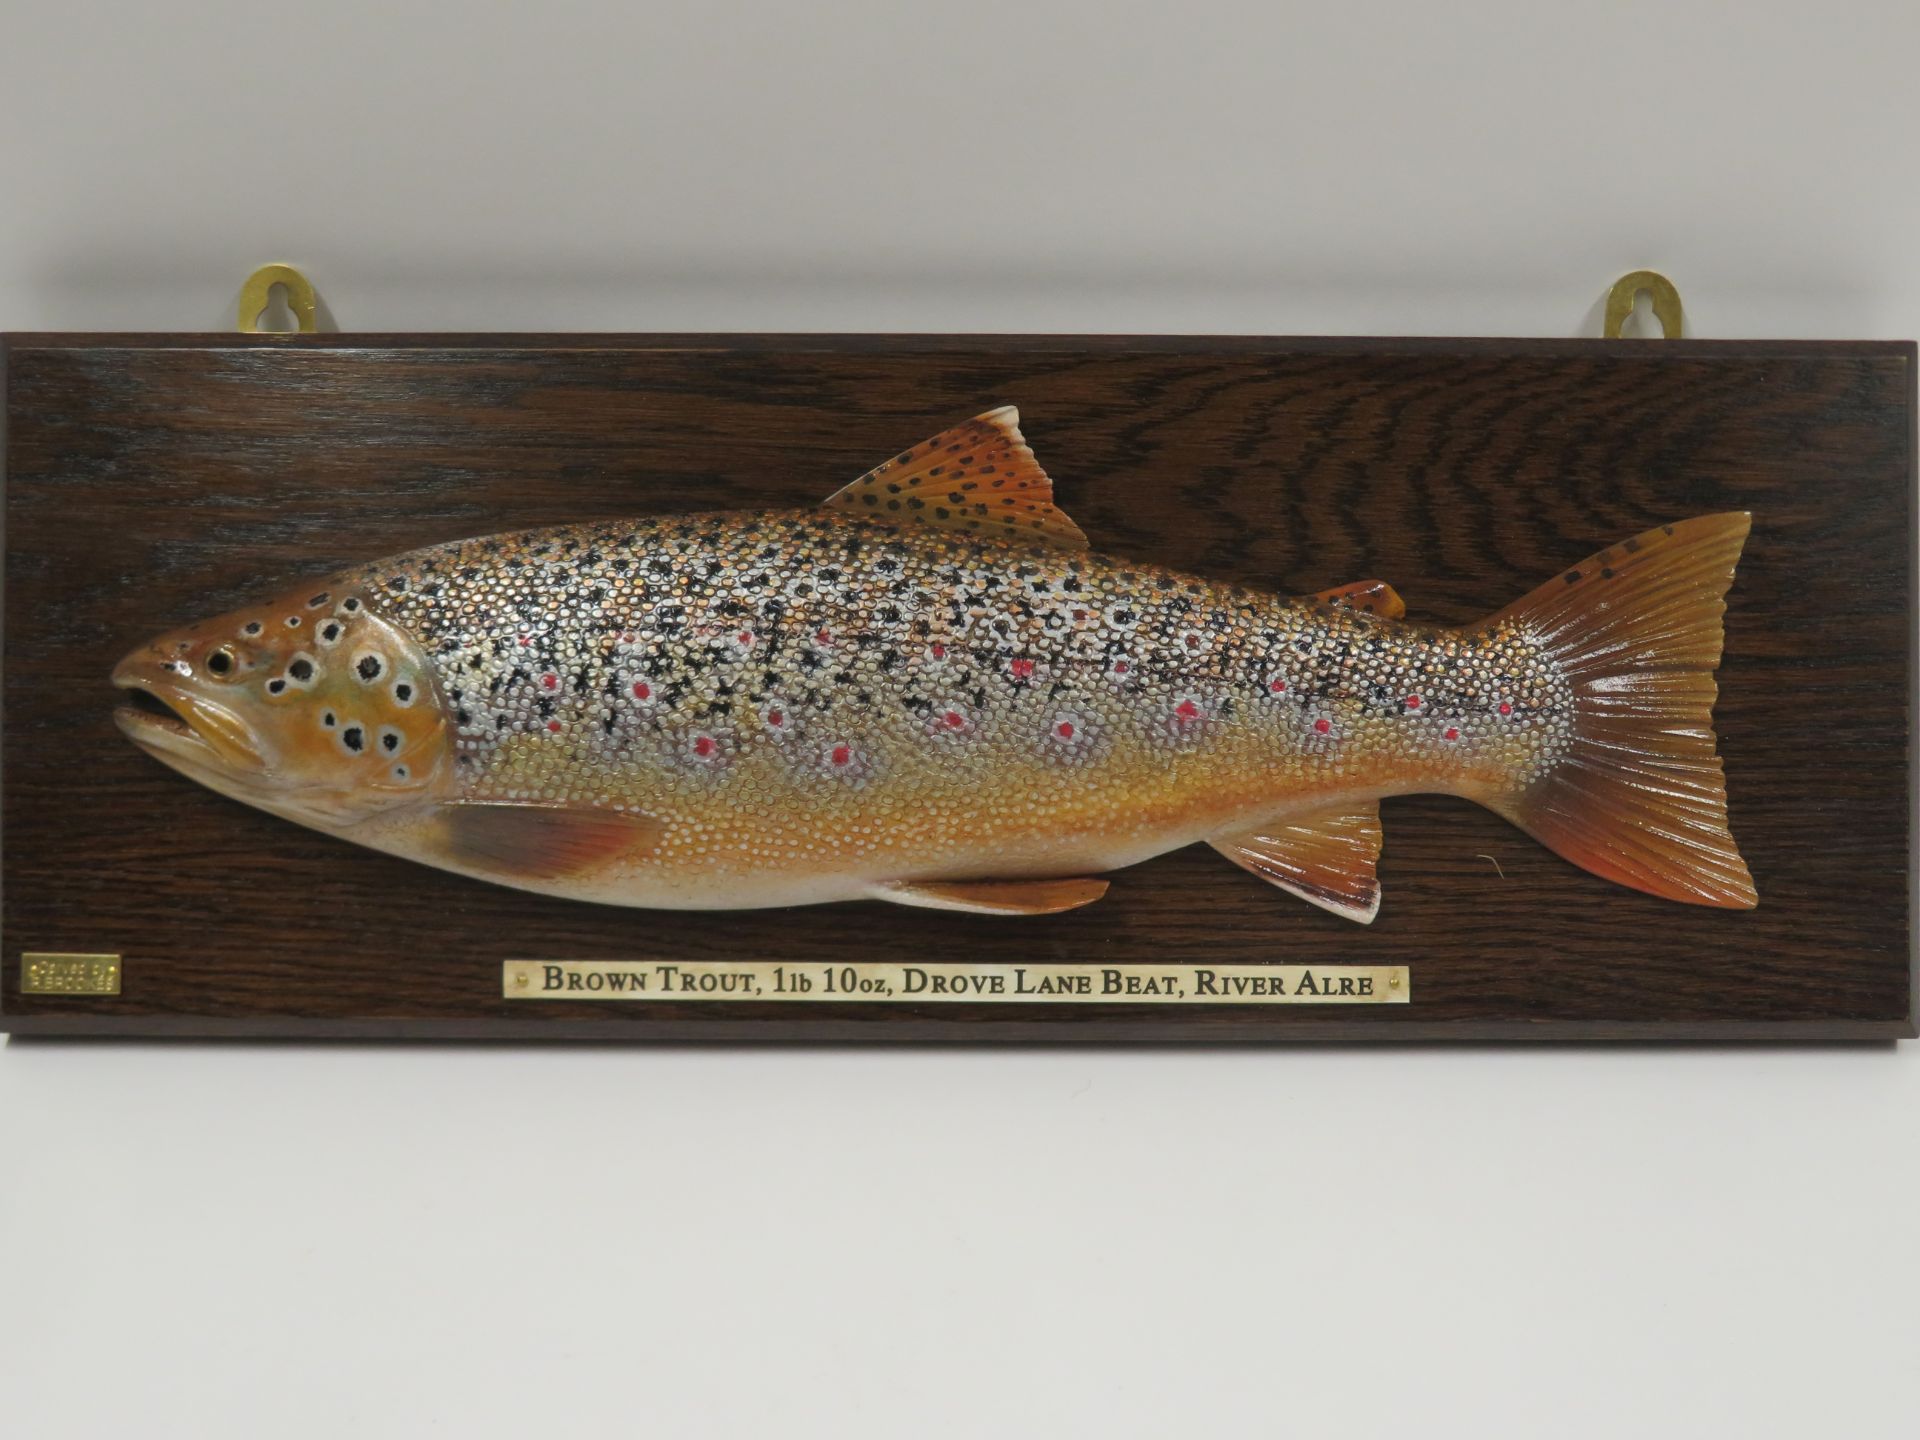 A CARVED WOODEN MODEL OF A BROWN TROUT BY ROGER BROOKES